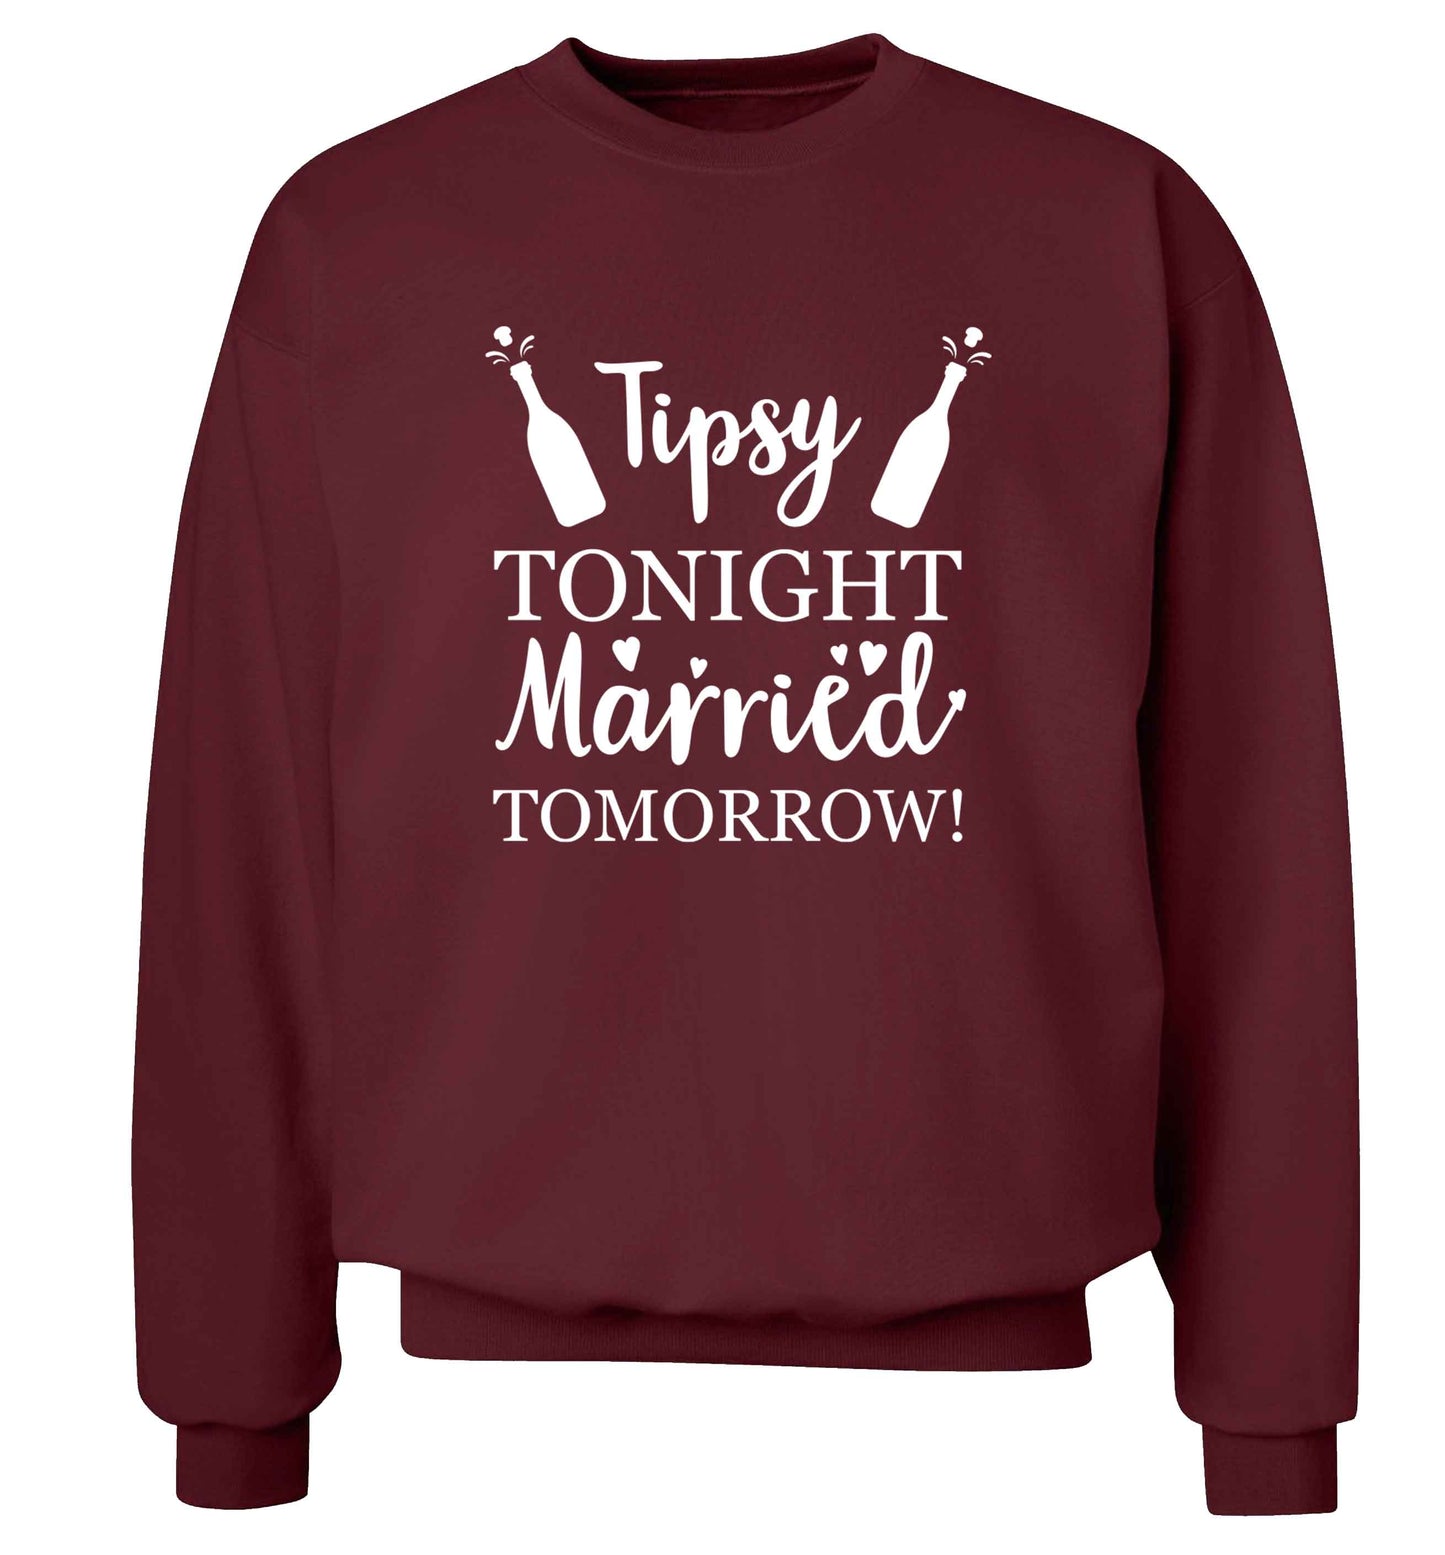 Personalised wedding thank you's Mr and Mrs wedding and date! Ideal wedding favours! adult's unisex maroon sweater 2XL